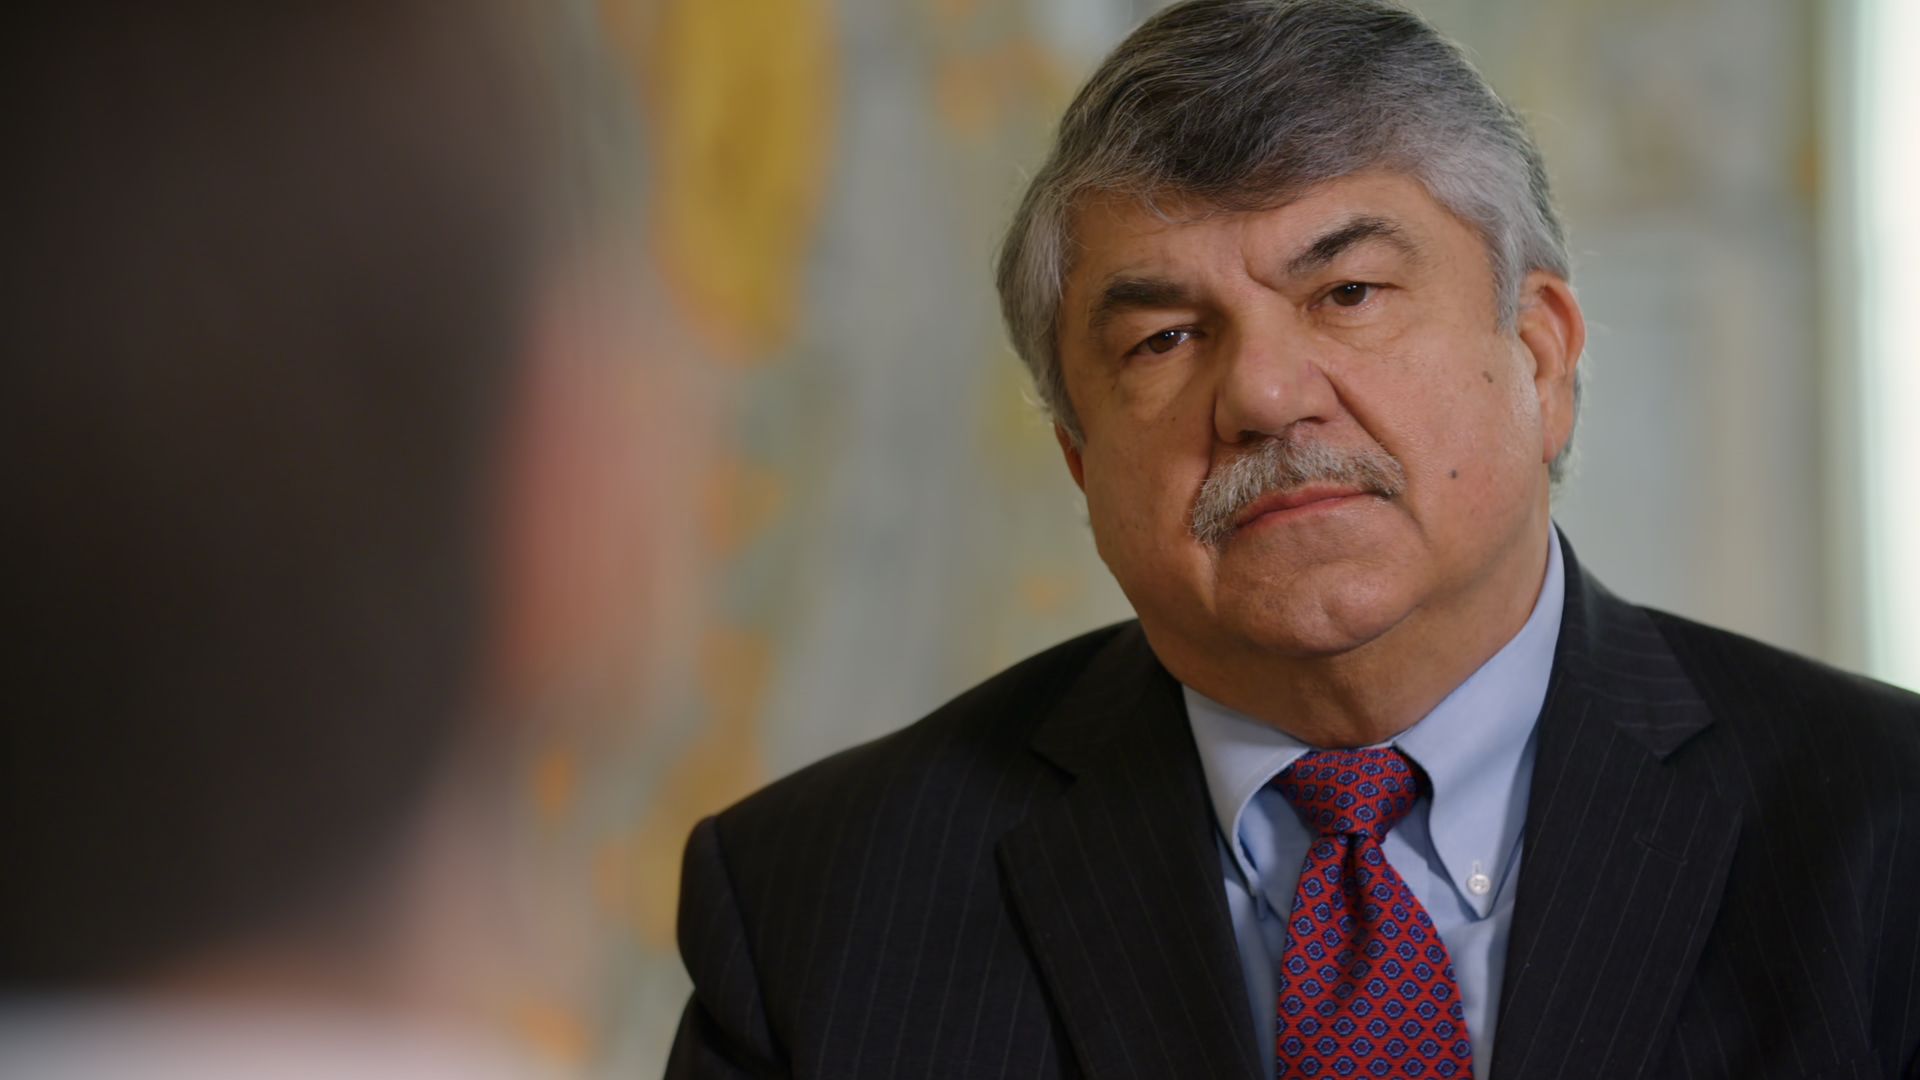 AFL-CIO President Richard Trumka is seen during an interview for 